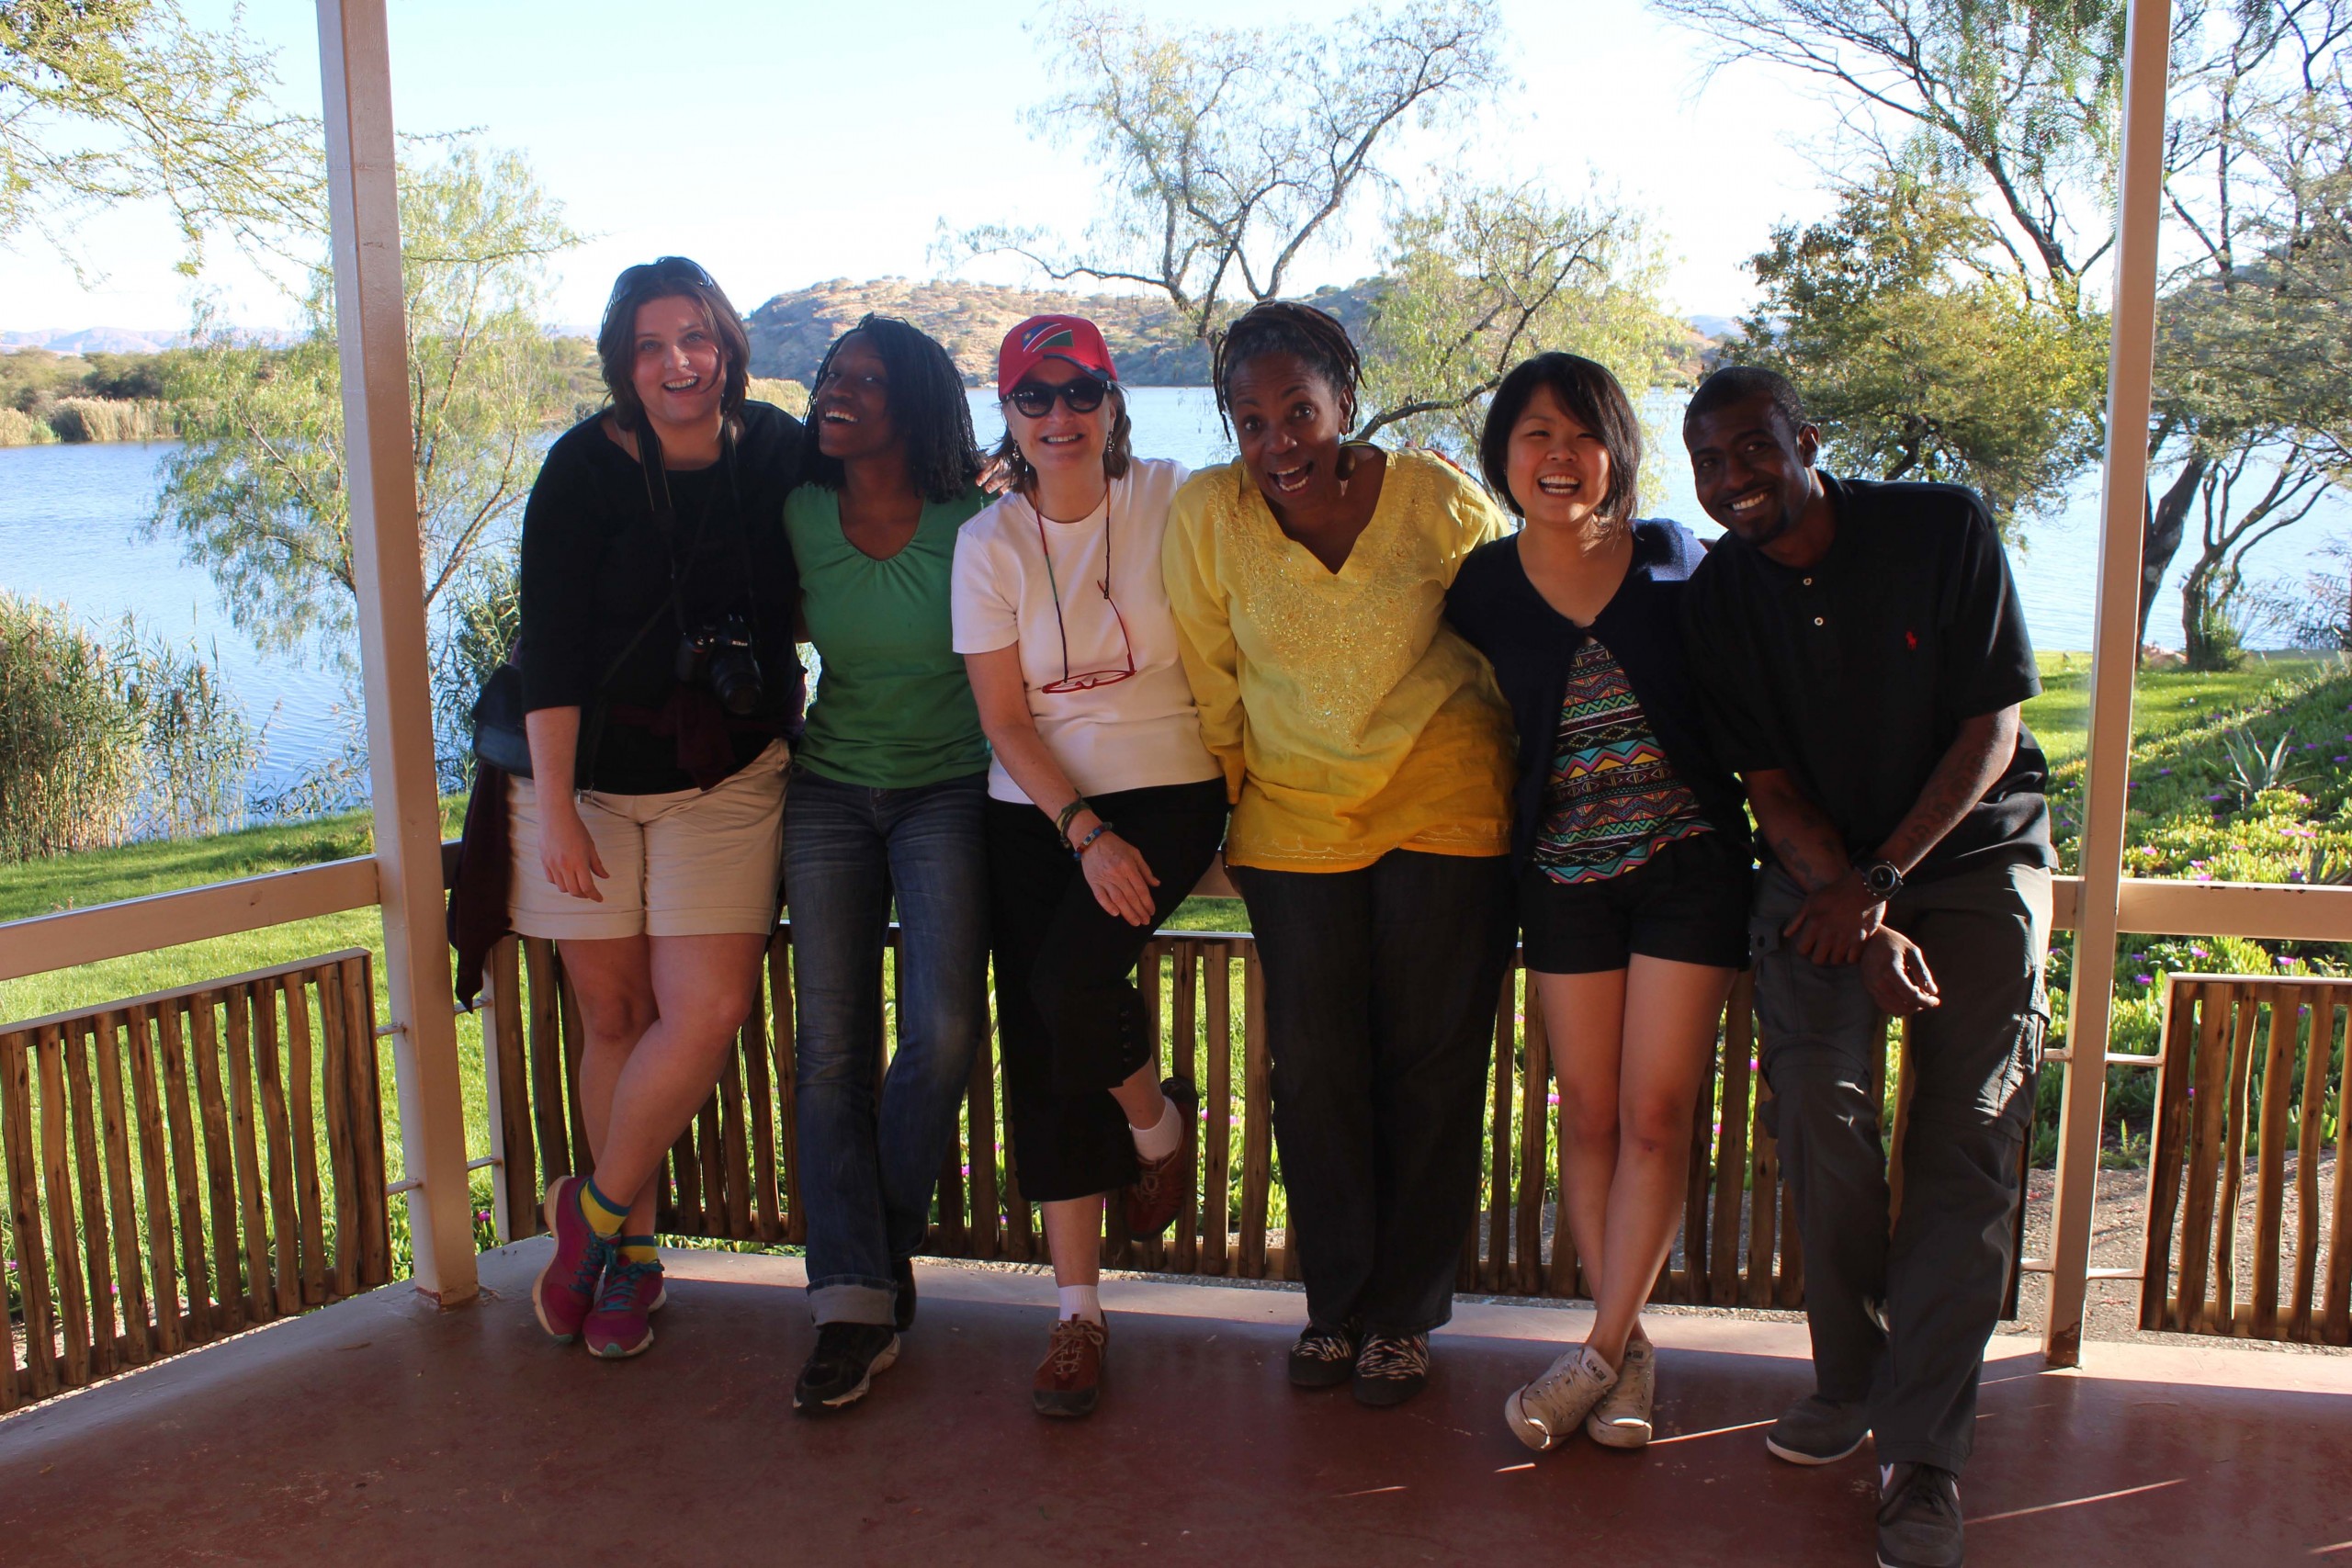 The ‘Namibia Nine’ film crew on location, from left: Andrea Capere, Princess Reese, Joanne Lisosky, Melannie Denise Cunningham, Shunying Wang, Maurice Byrd.